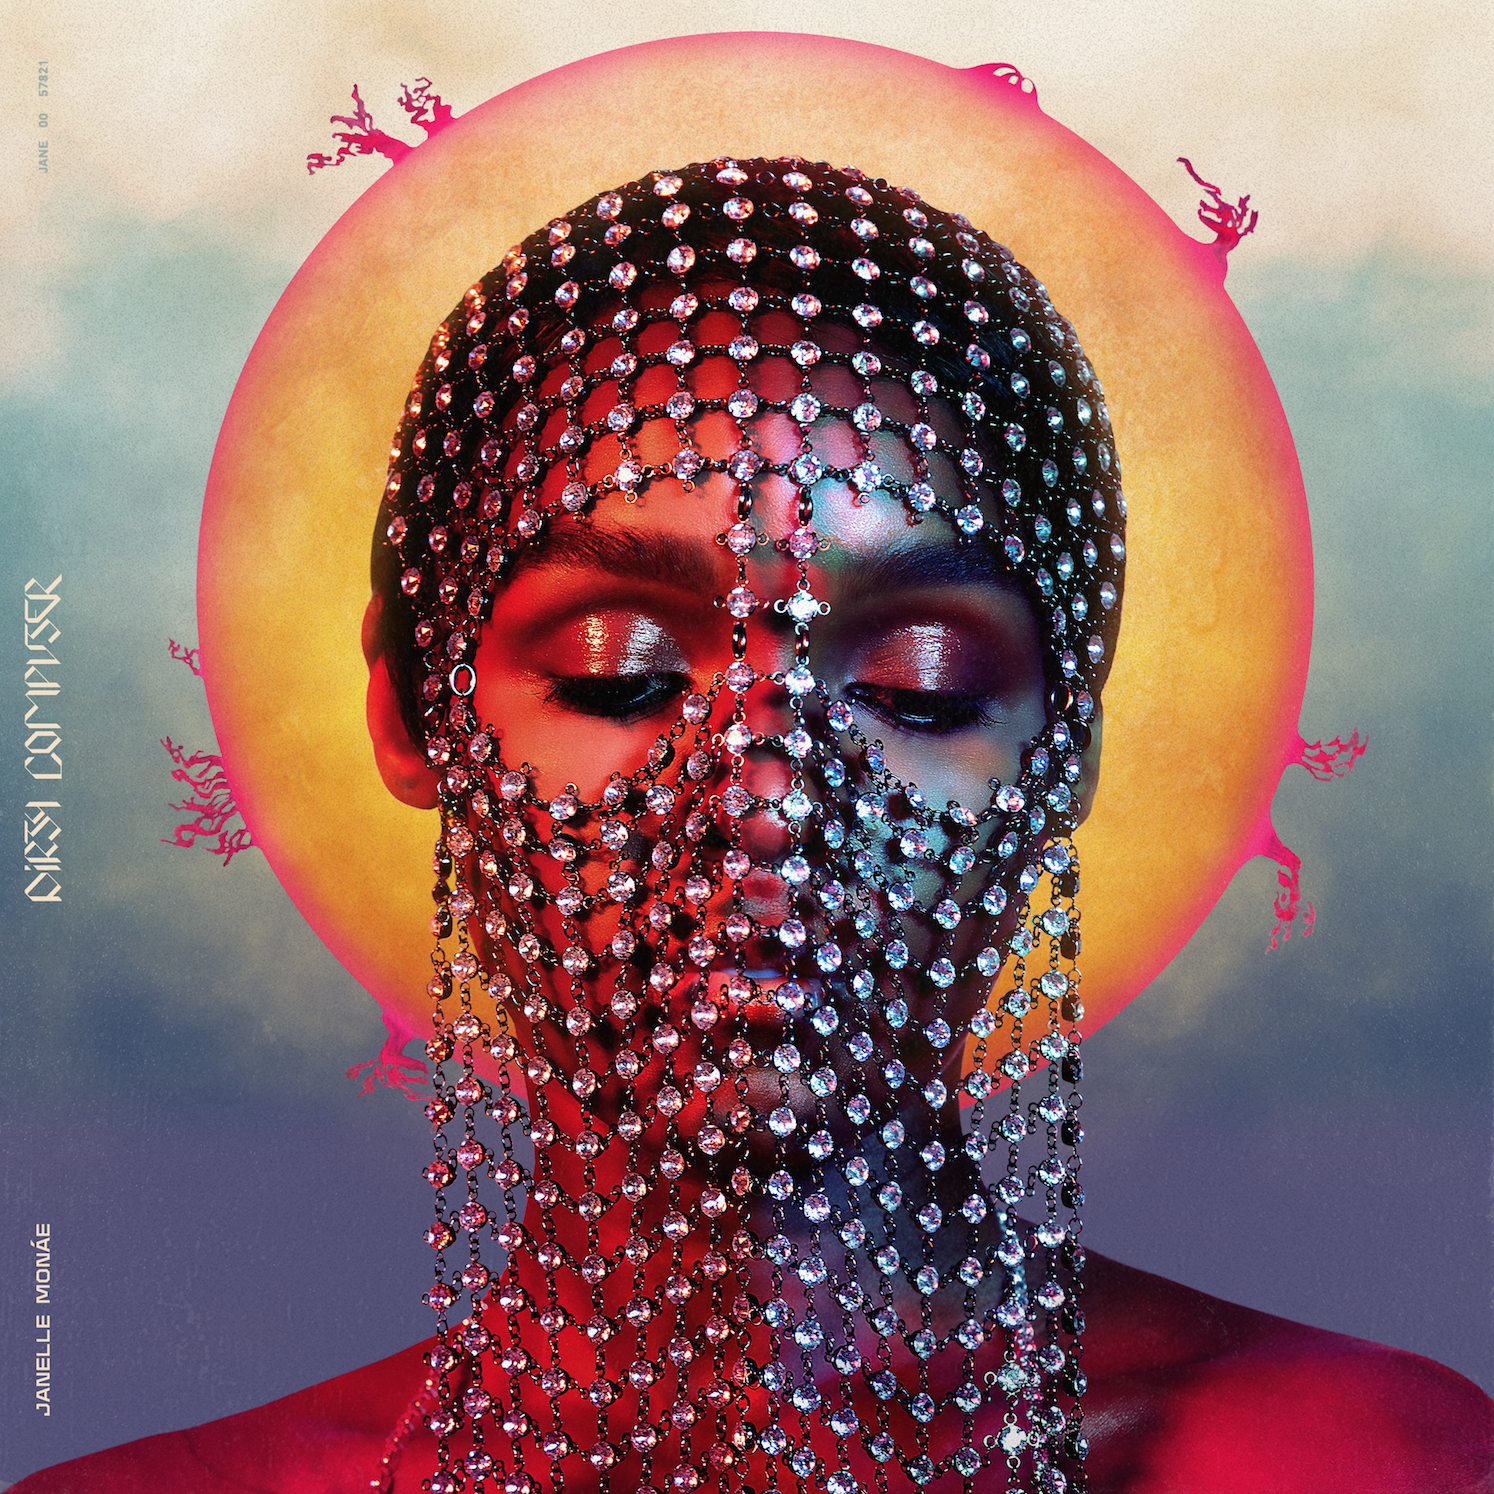 Janelle Monáe Details New Album <i>Dirty Computer</i>, Releases Videos For “Make Me Feel” and “Django Jane”” title=”Screen-Shot-2018-02-22-at-12.29.32-PM-1519320610″ data-original-id=”279595″ data-adjusted-id=”279595″ class=”sm_size_full_width sm_alignment_center ” data-image-source=”professional” />
<div class=